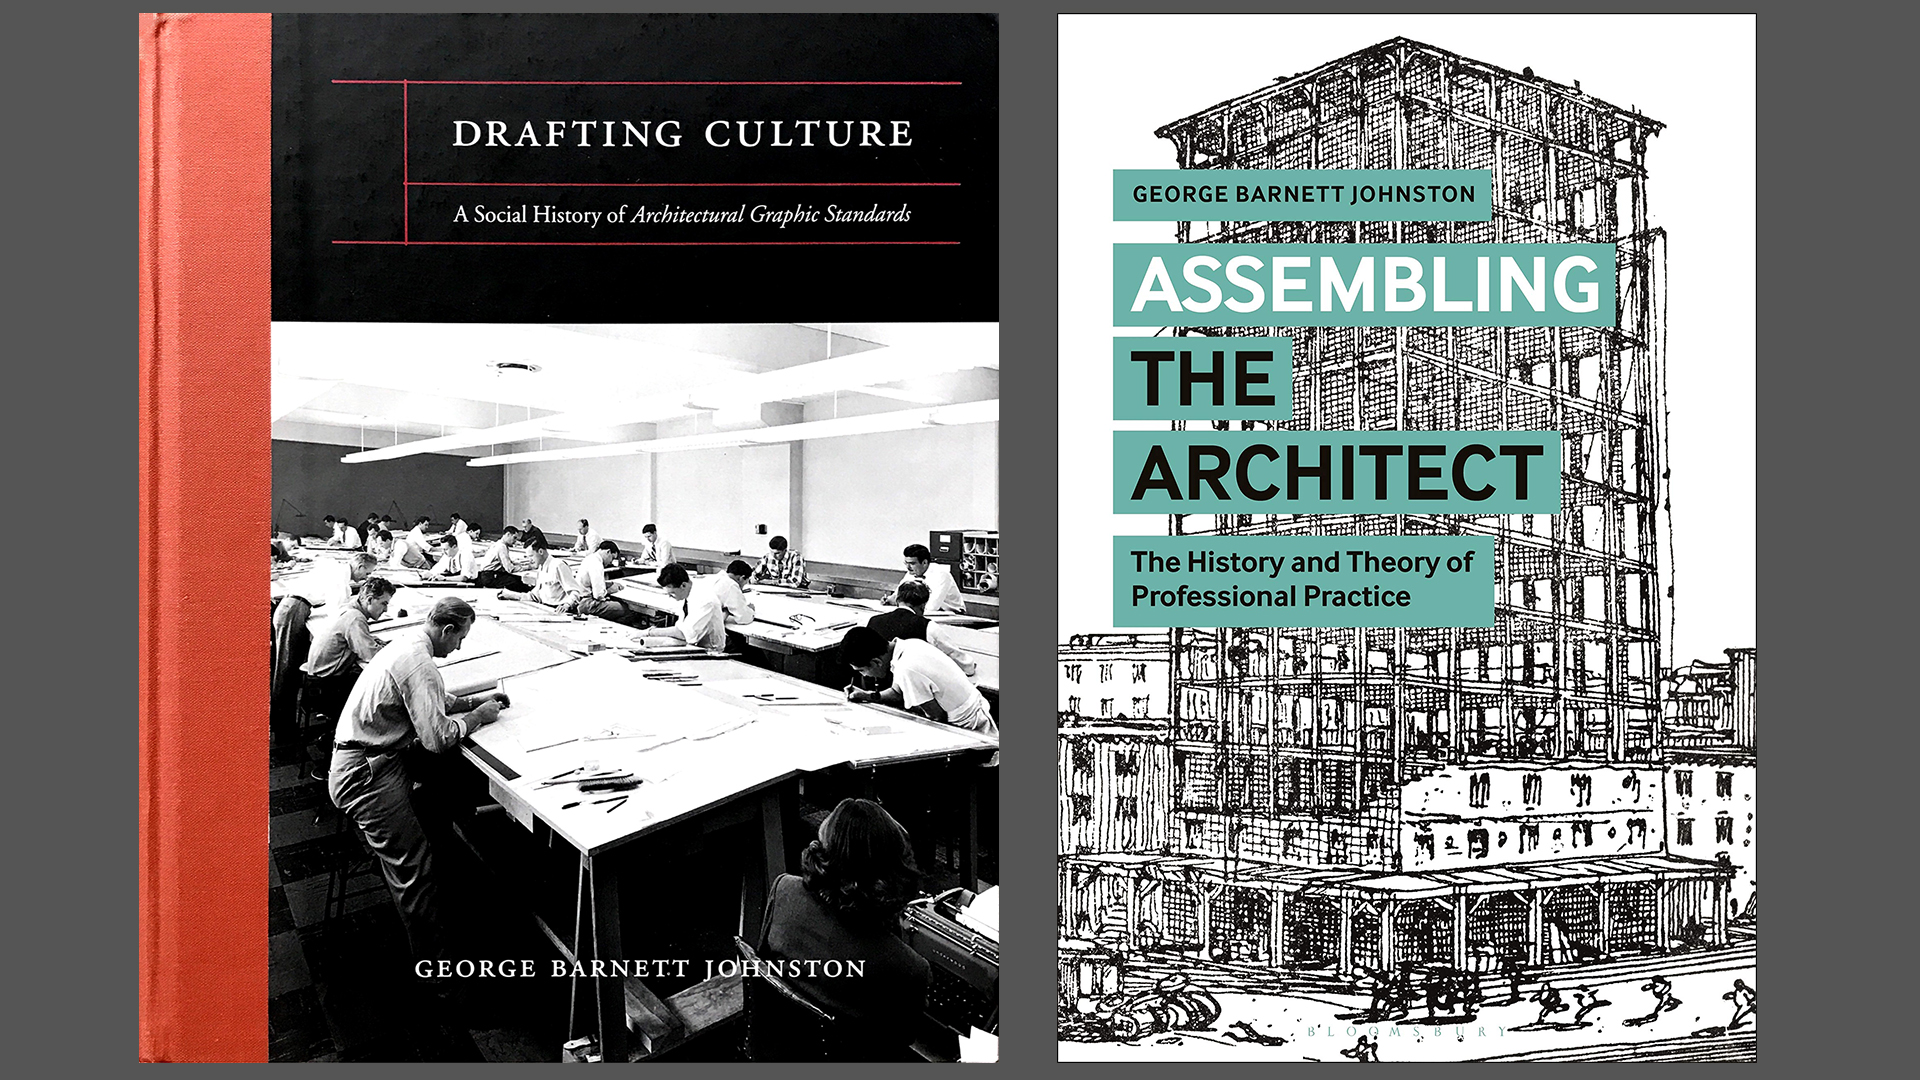 Book covers for Drafting Culture: A Social History of Architectural Graphic Standards and Assembling the Architect: The History and Theory of Professional Practice by George Barnett Johnston